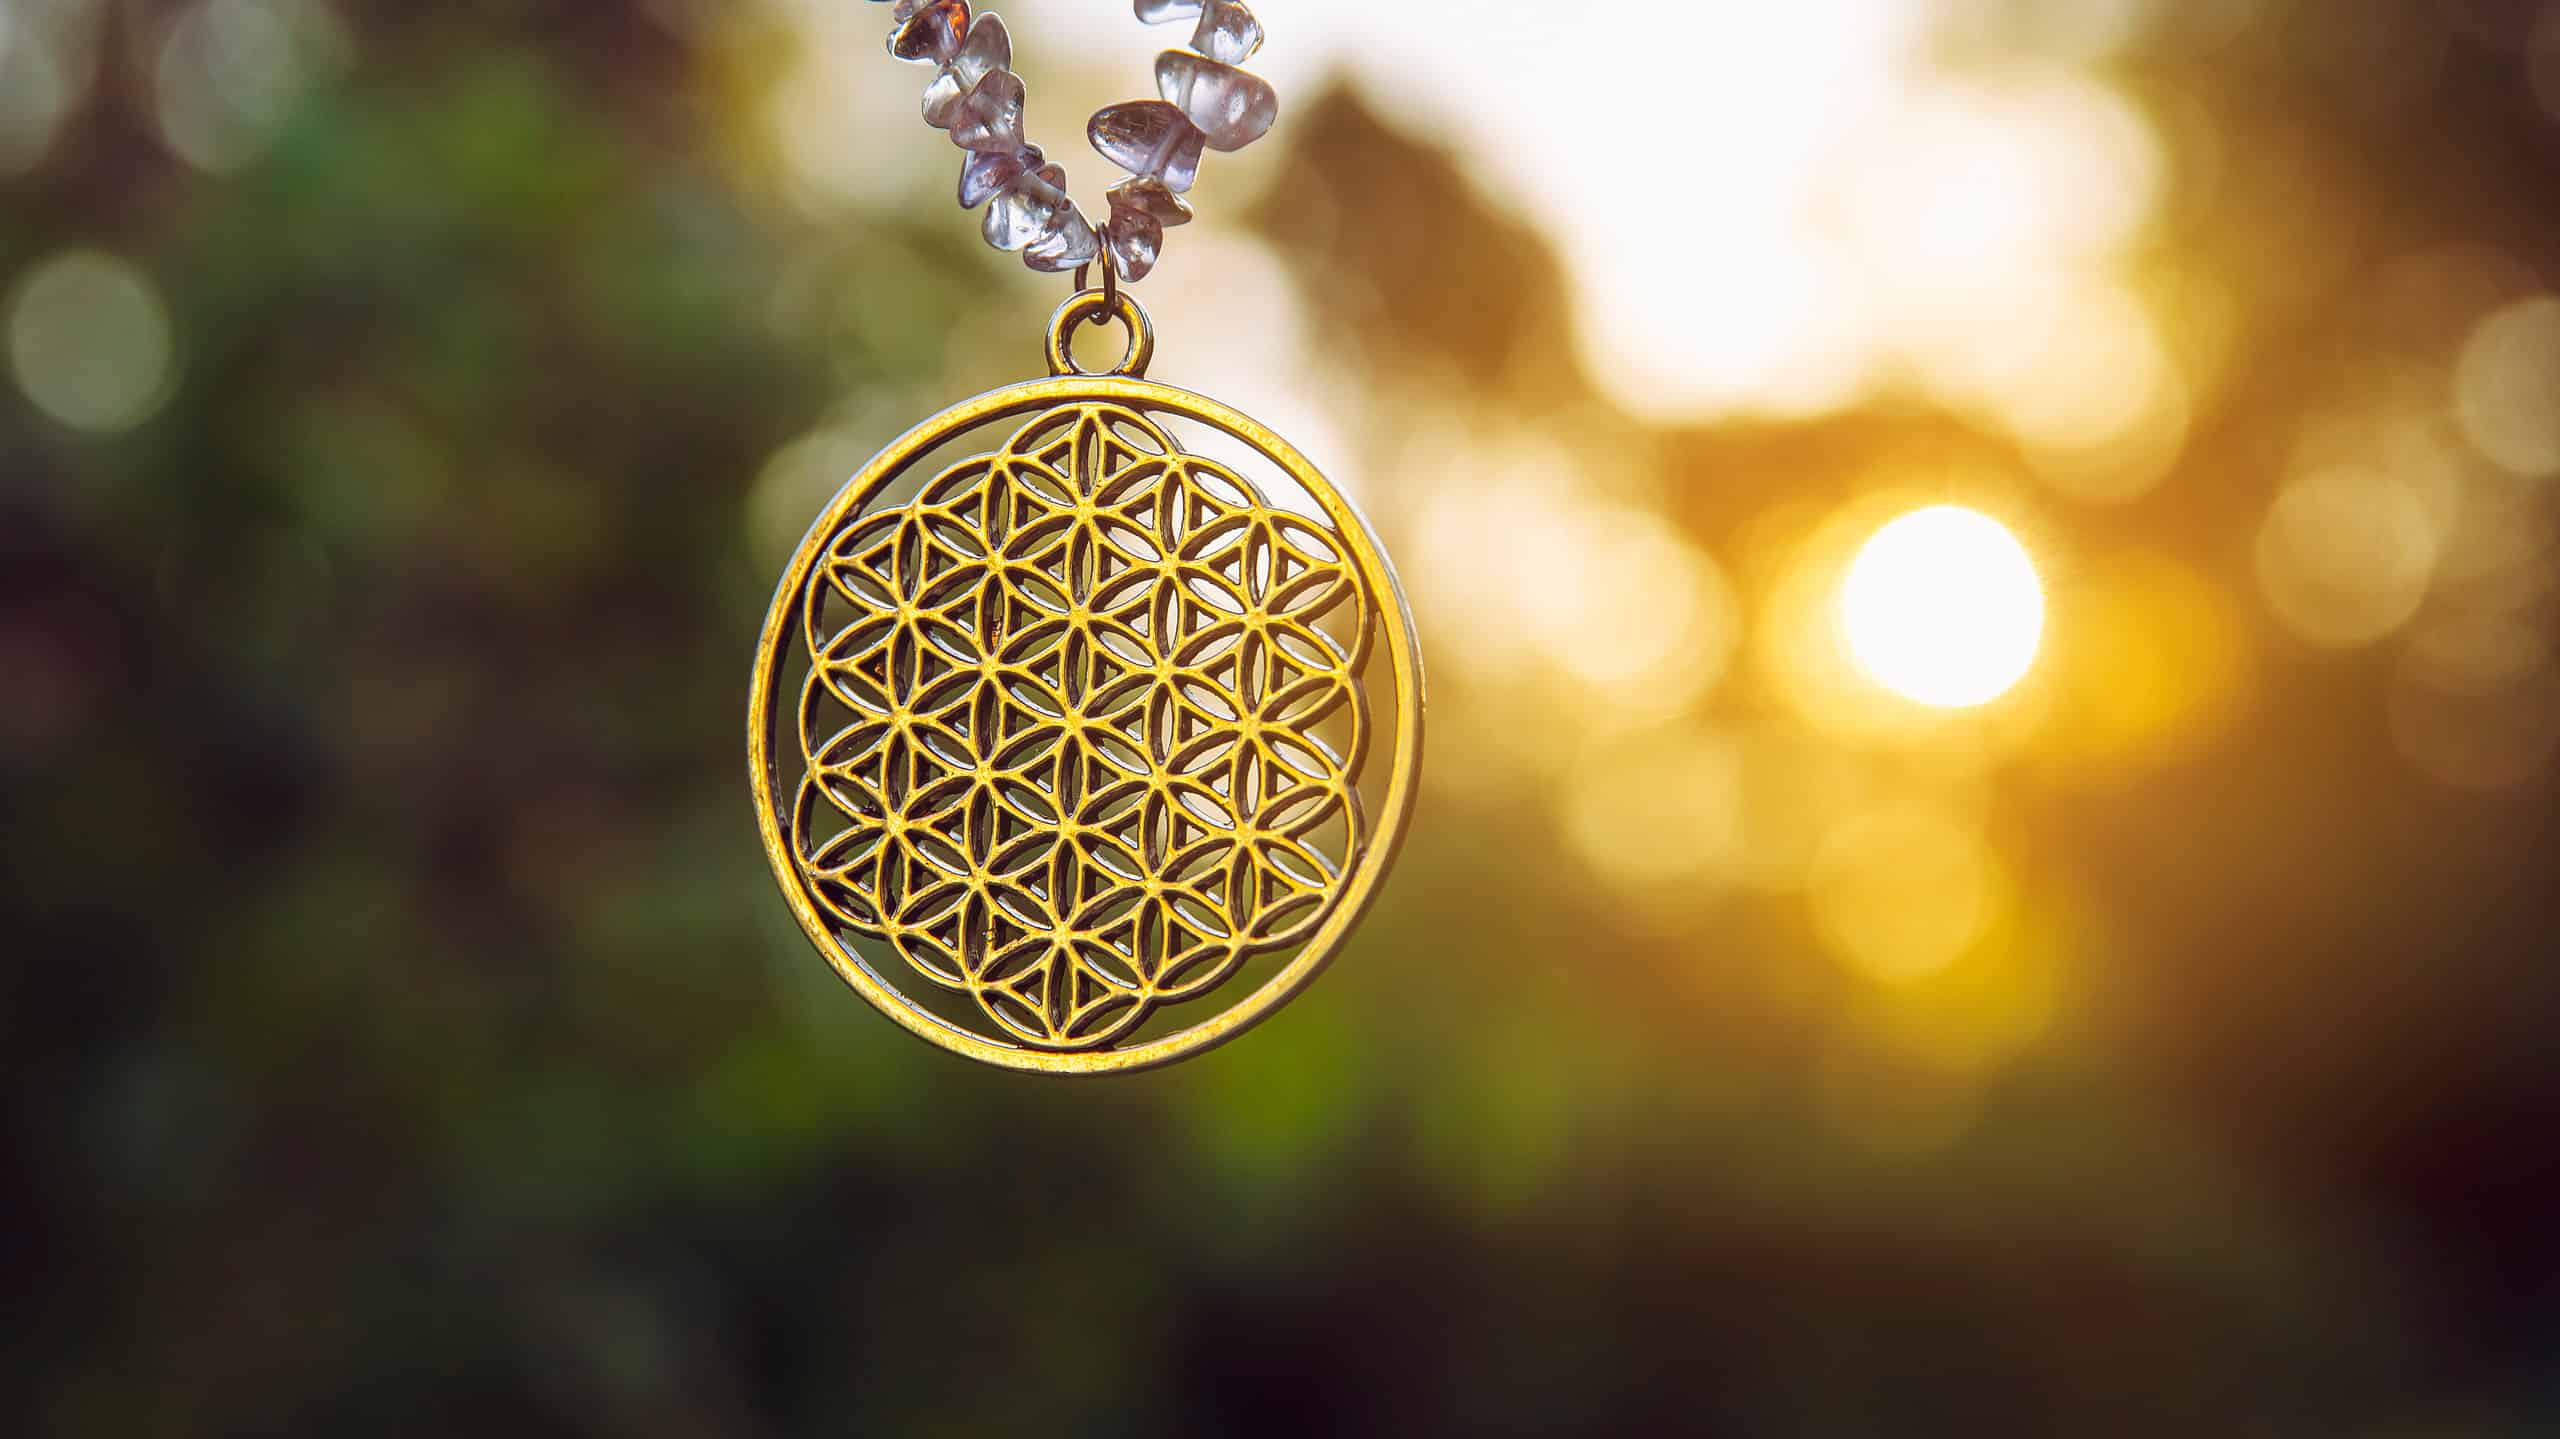 Flower of Life symbol pendant amulet with sun shining though hanging outdoors with lot of copy space. Good luck charm.